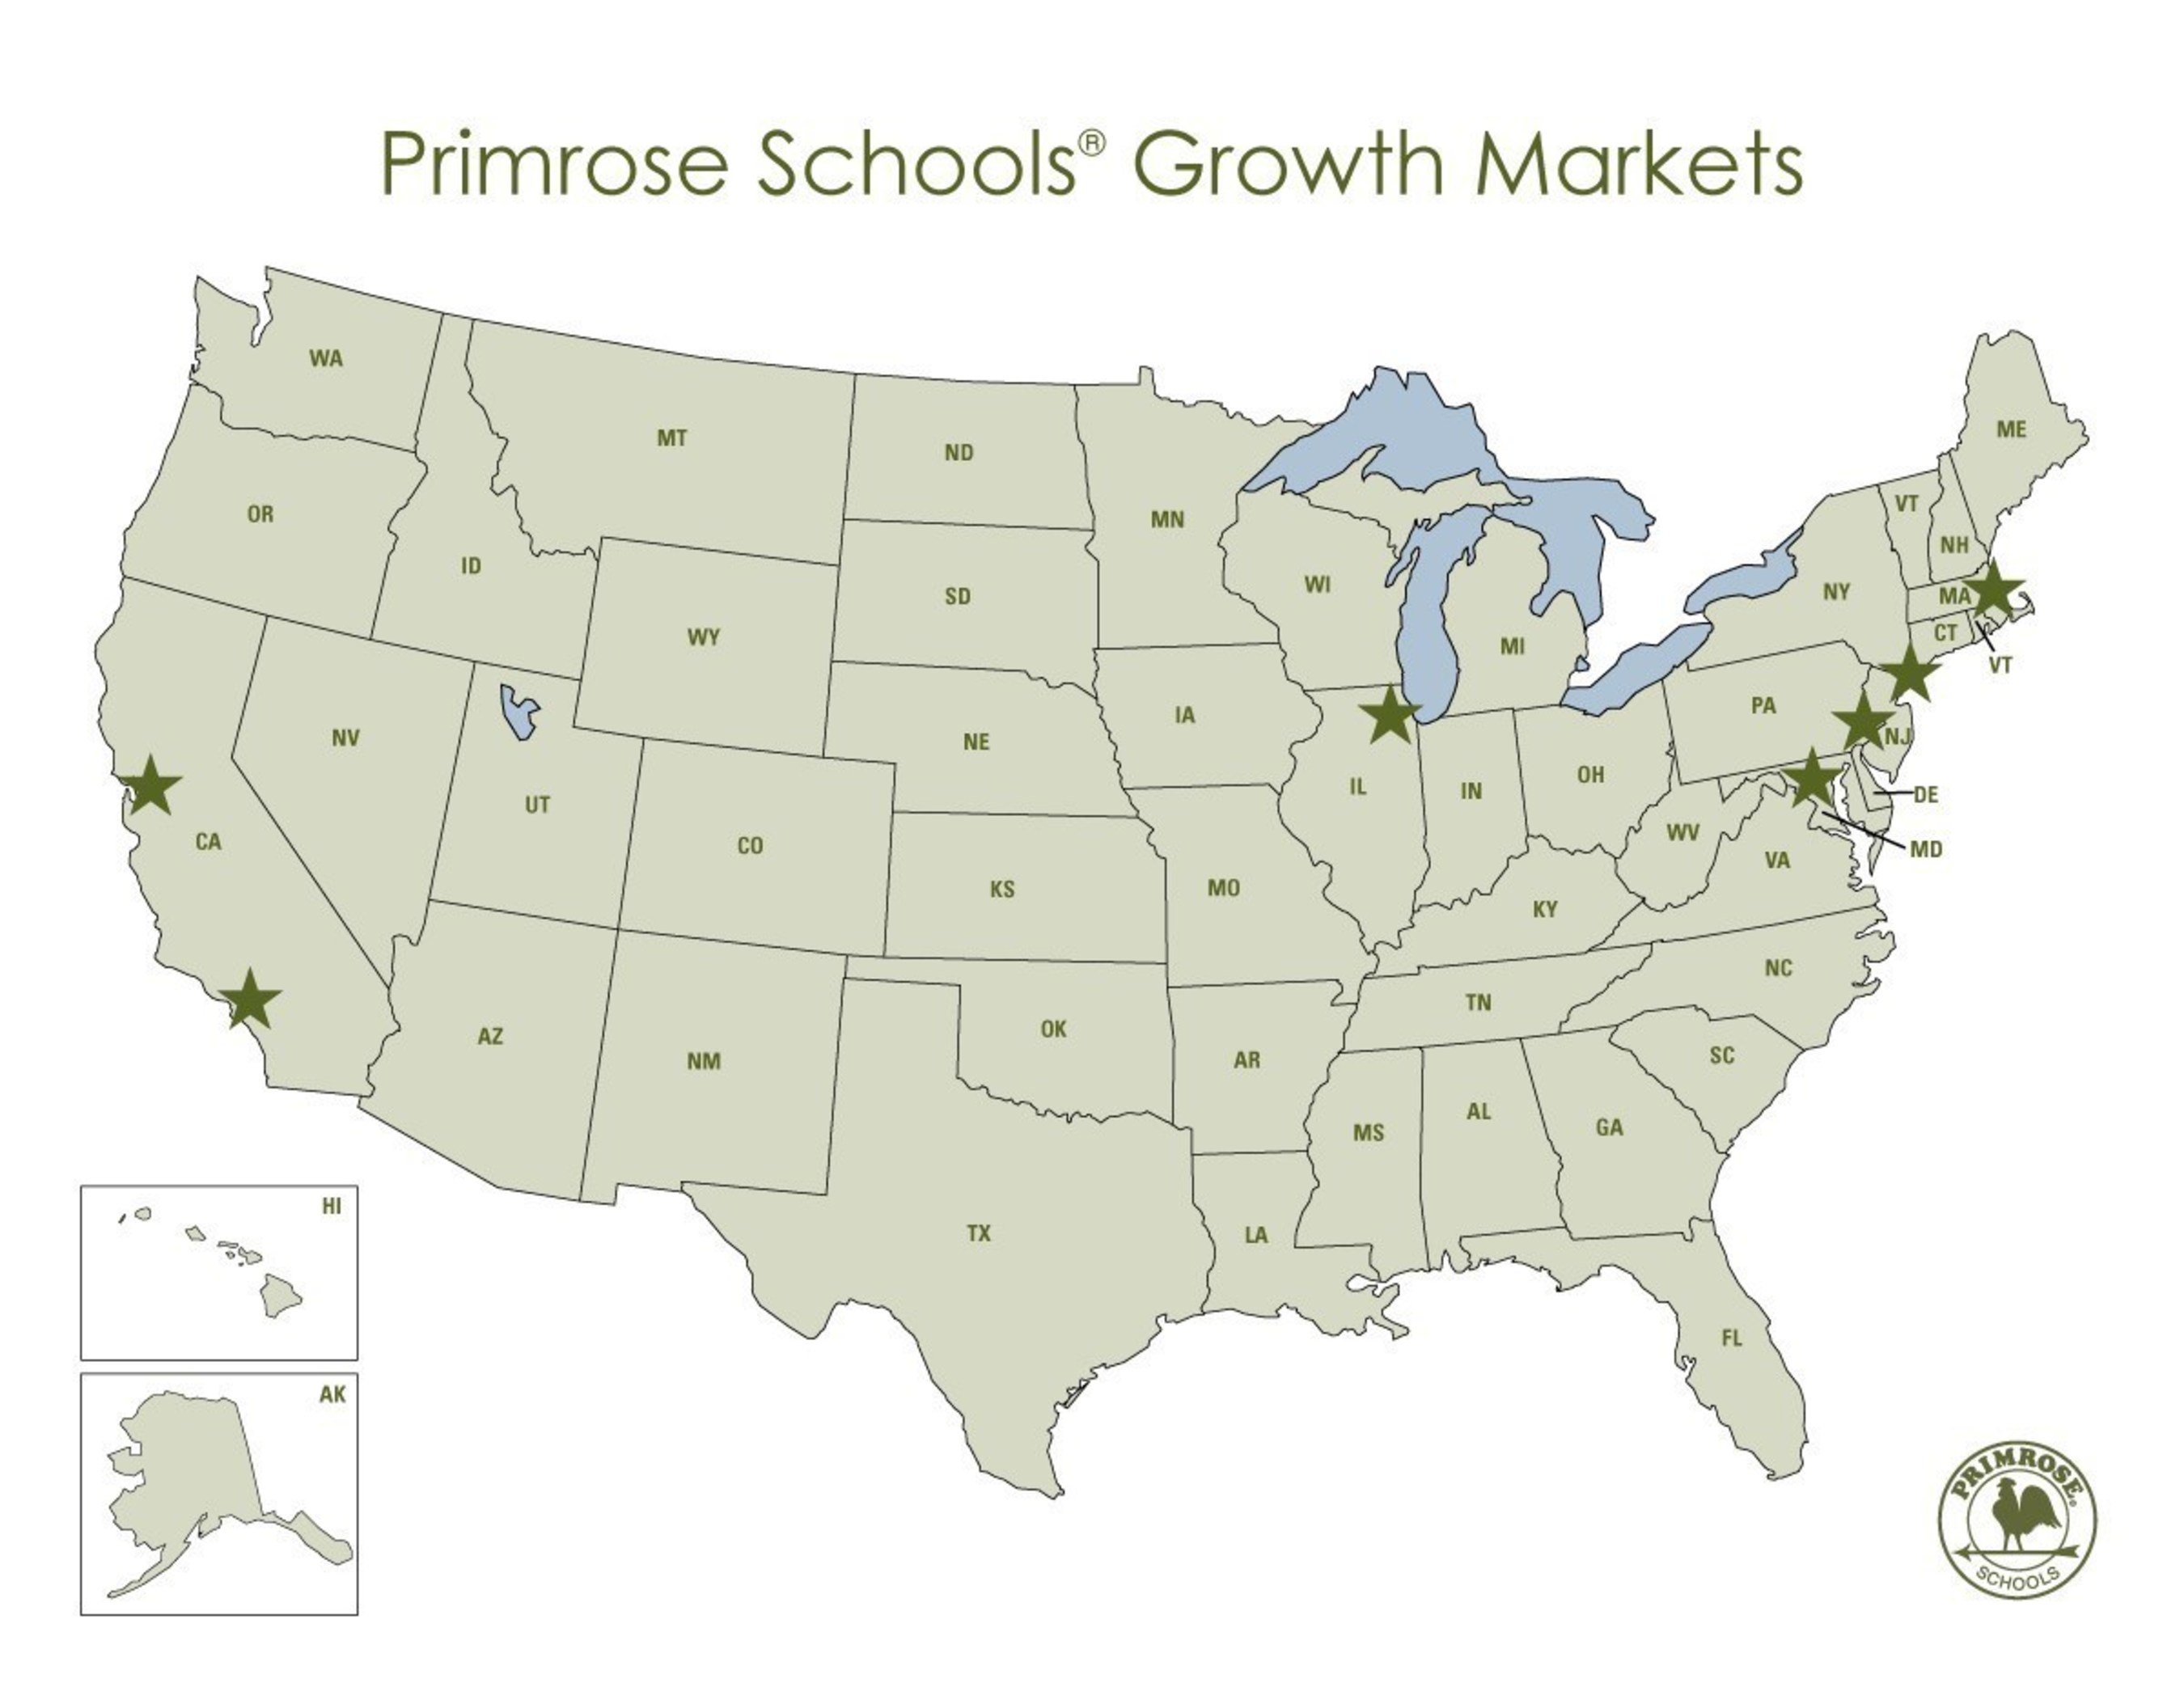 Primrose Schools(R) boasts record growth in 2014 with plans to open 300th school in 2015